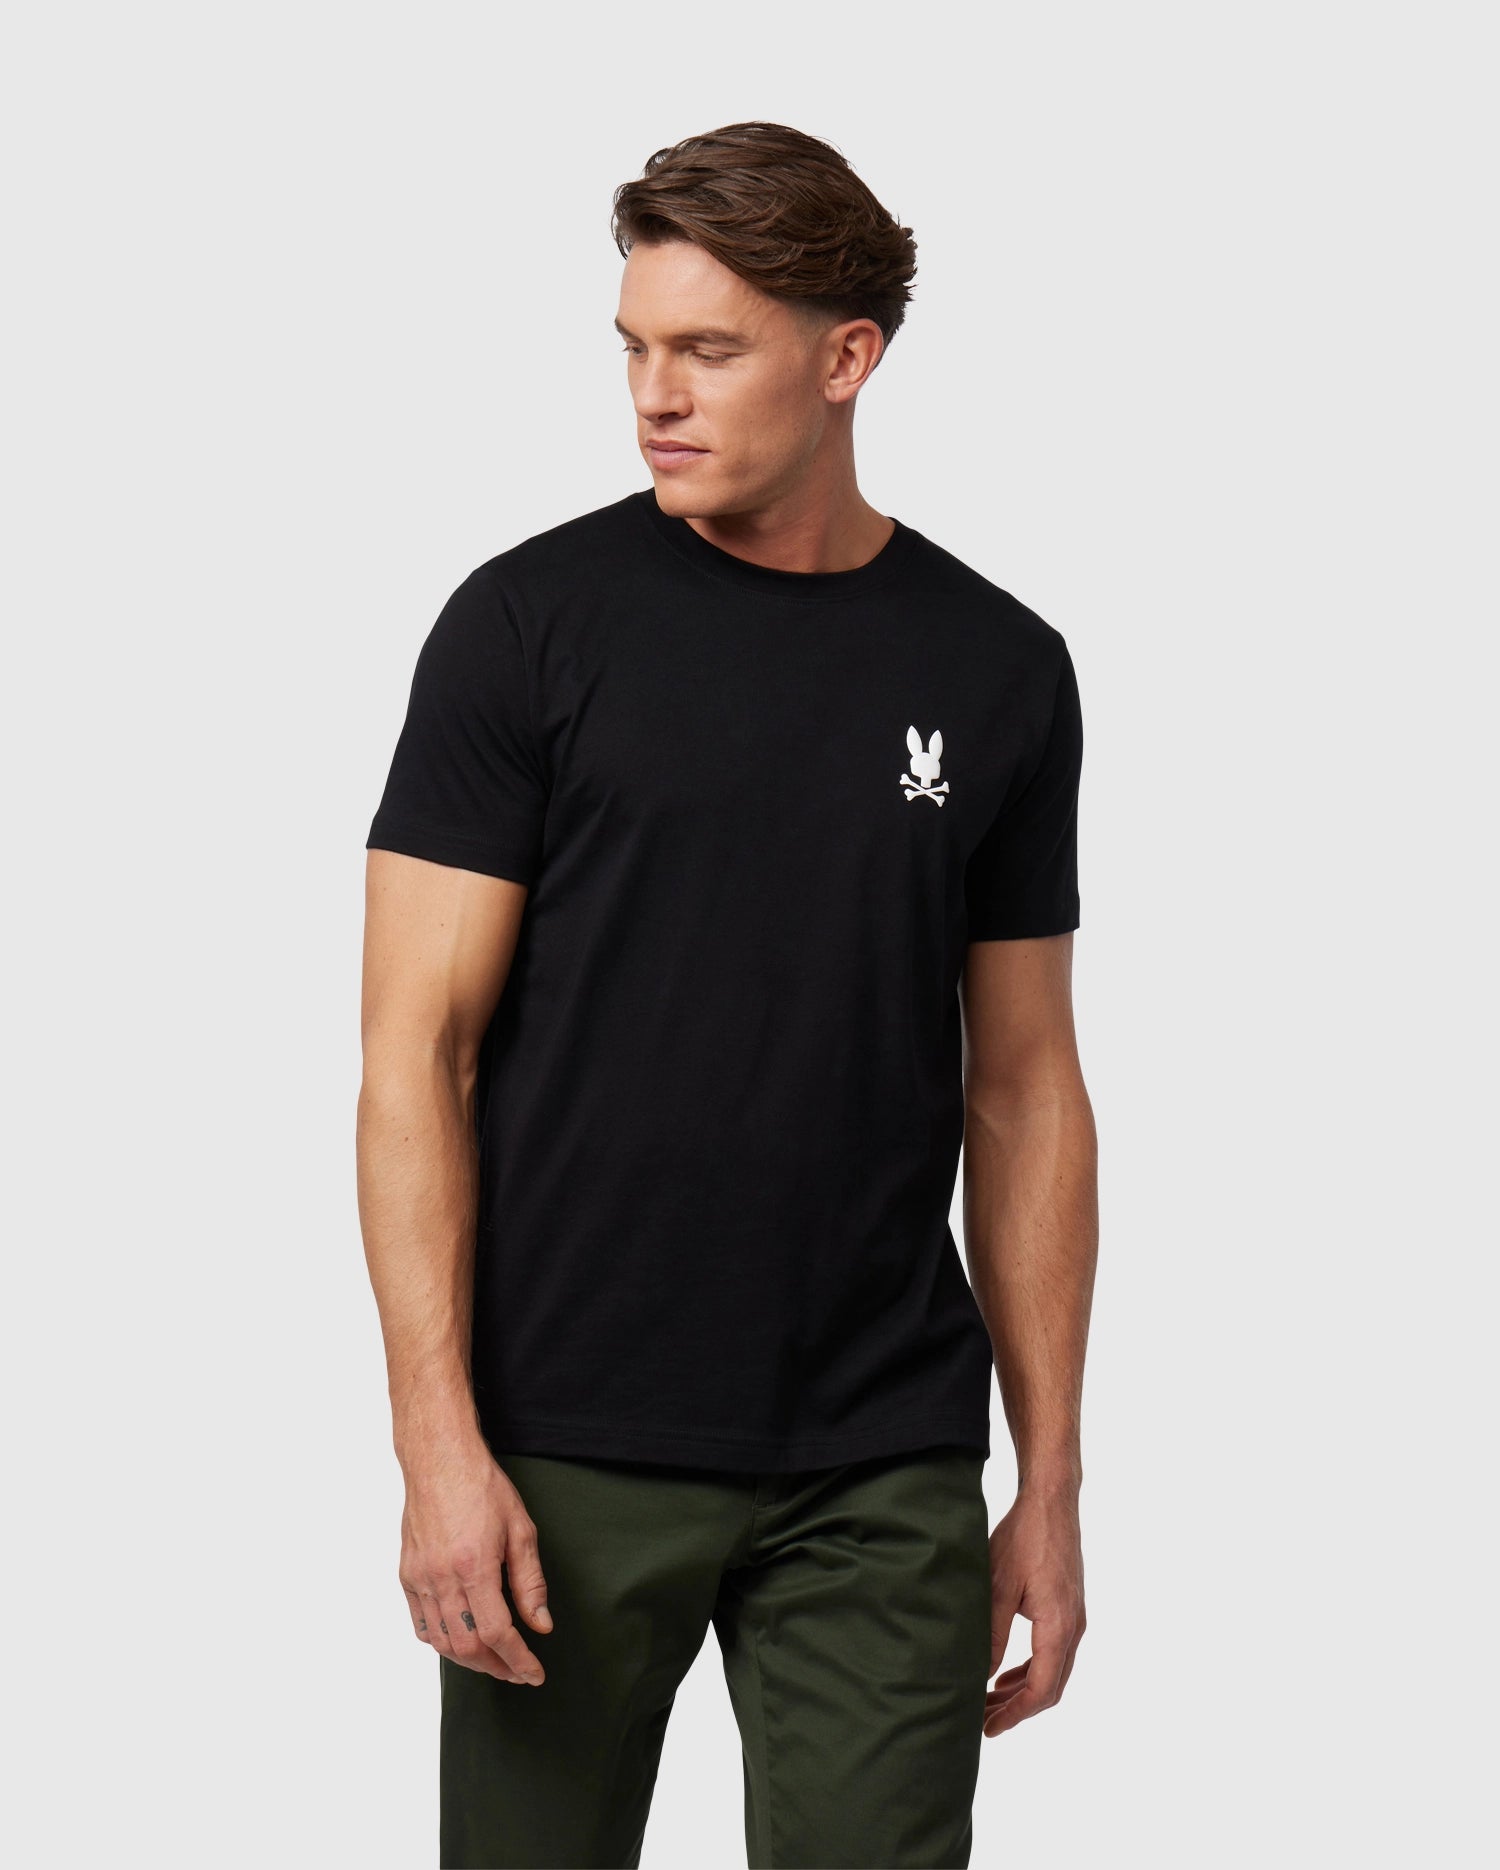 A man standing, wearing a black Psycho Bunny Pima cotton T-shirt with a white logo on the chest and dark green pants, looking to his left with a neutral expression.